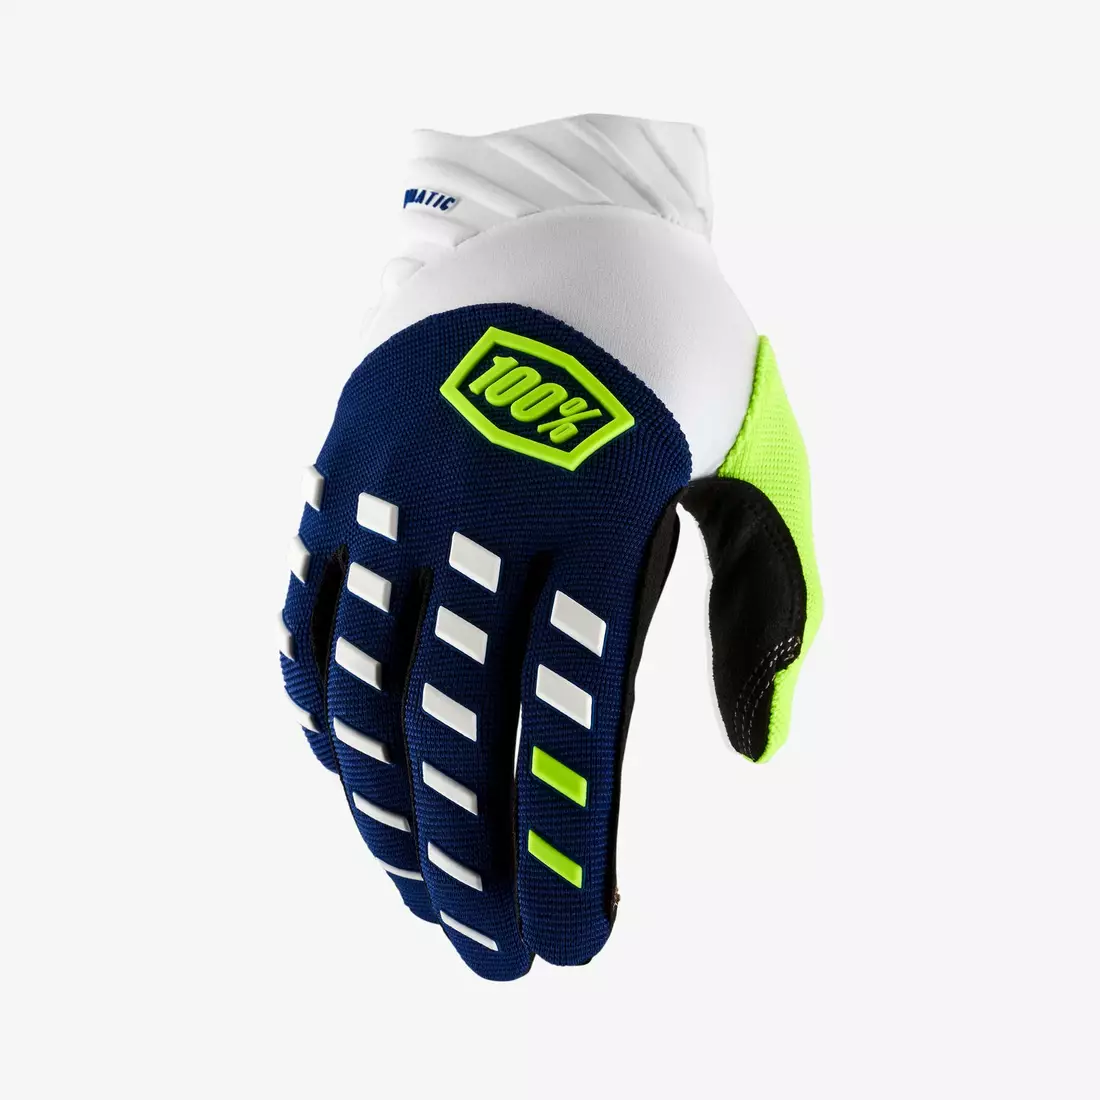 100% AIRMATIC Cycling gloves, navy blue and white